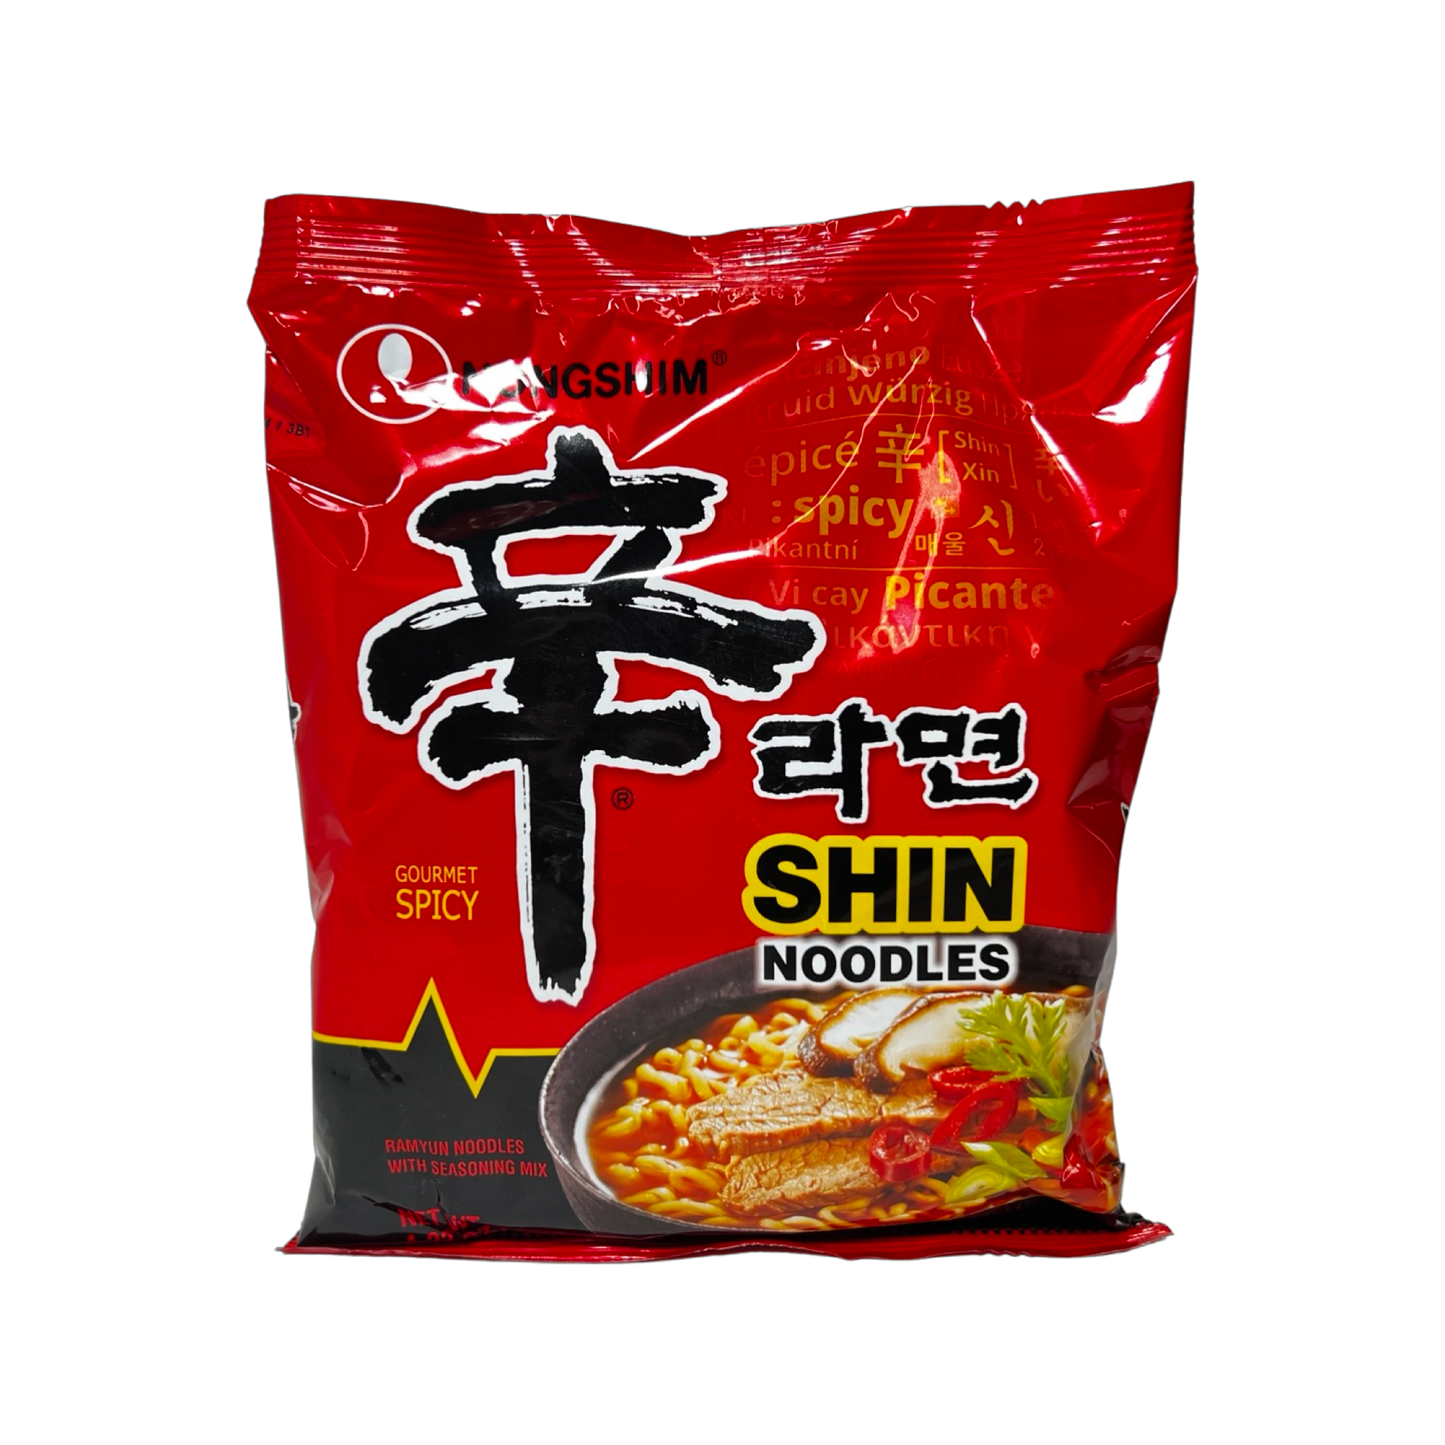 Nongshim Shin Noodles Gourmet Spicy Ramyun Noodles with Seasoning Mix 120g